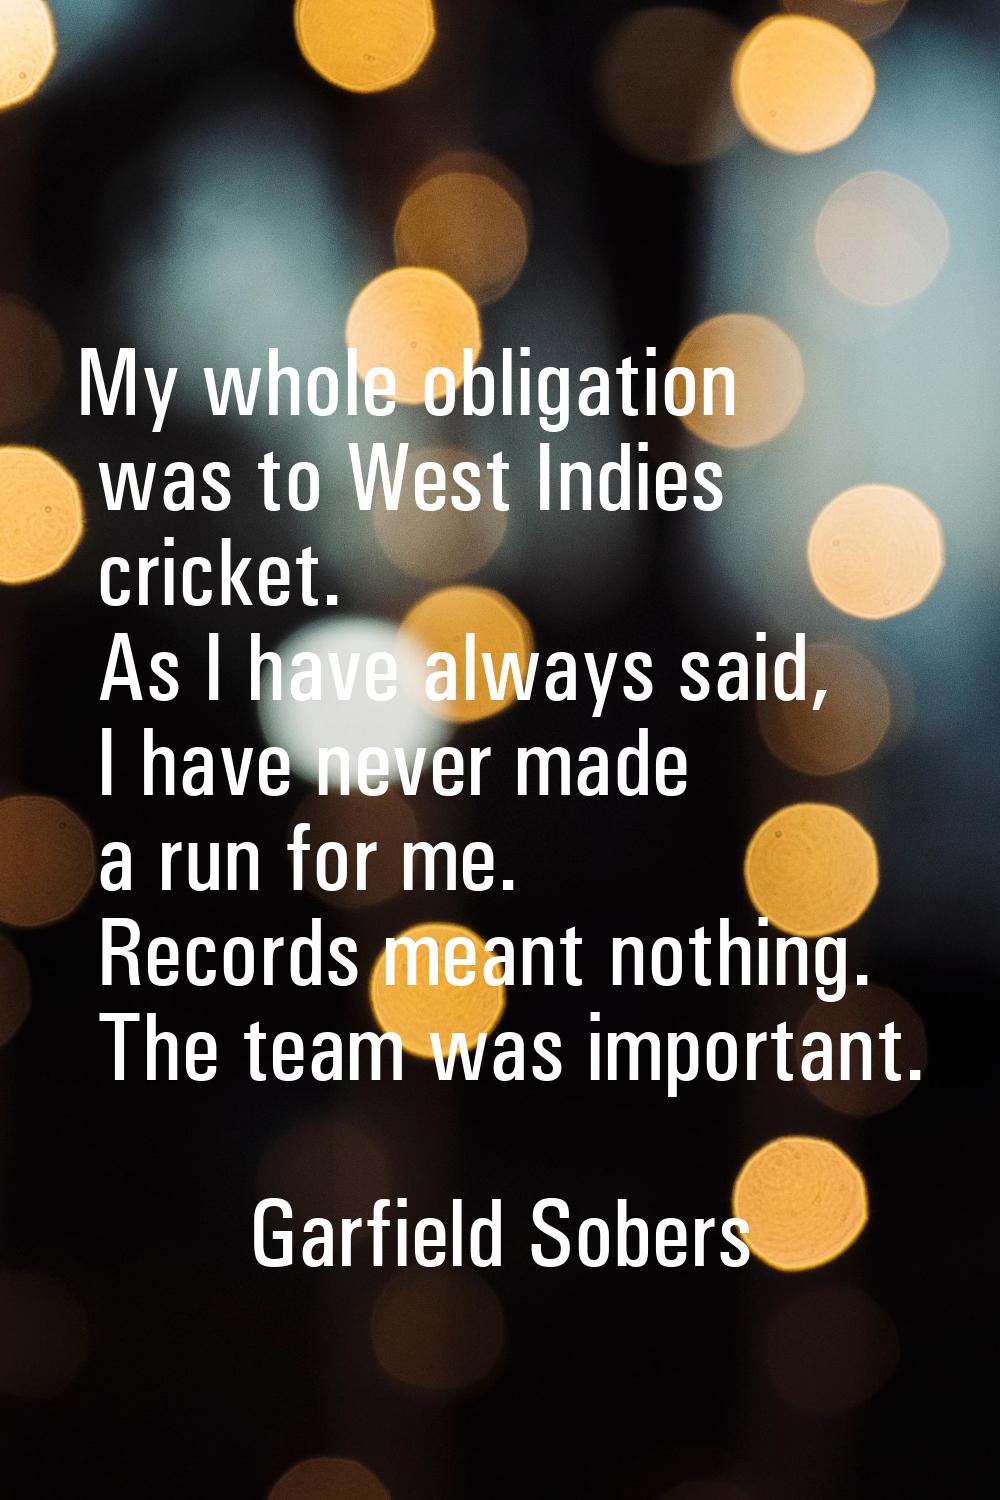 My whole obligation was to West Indies cricket. As I have always said, I have never made a run for 